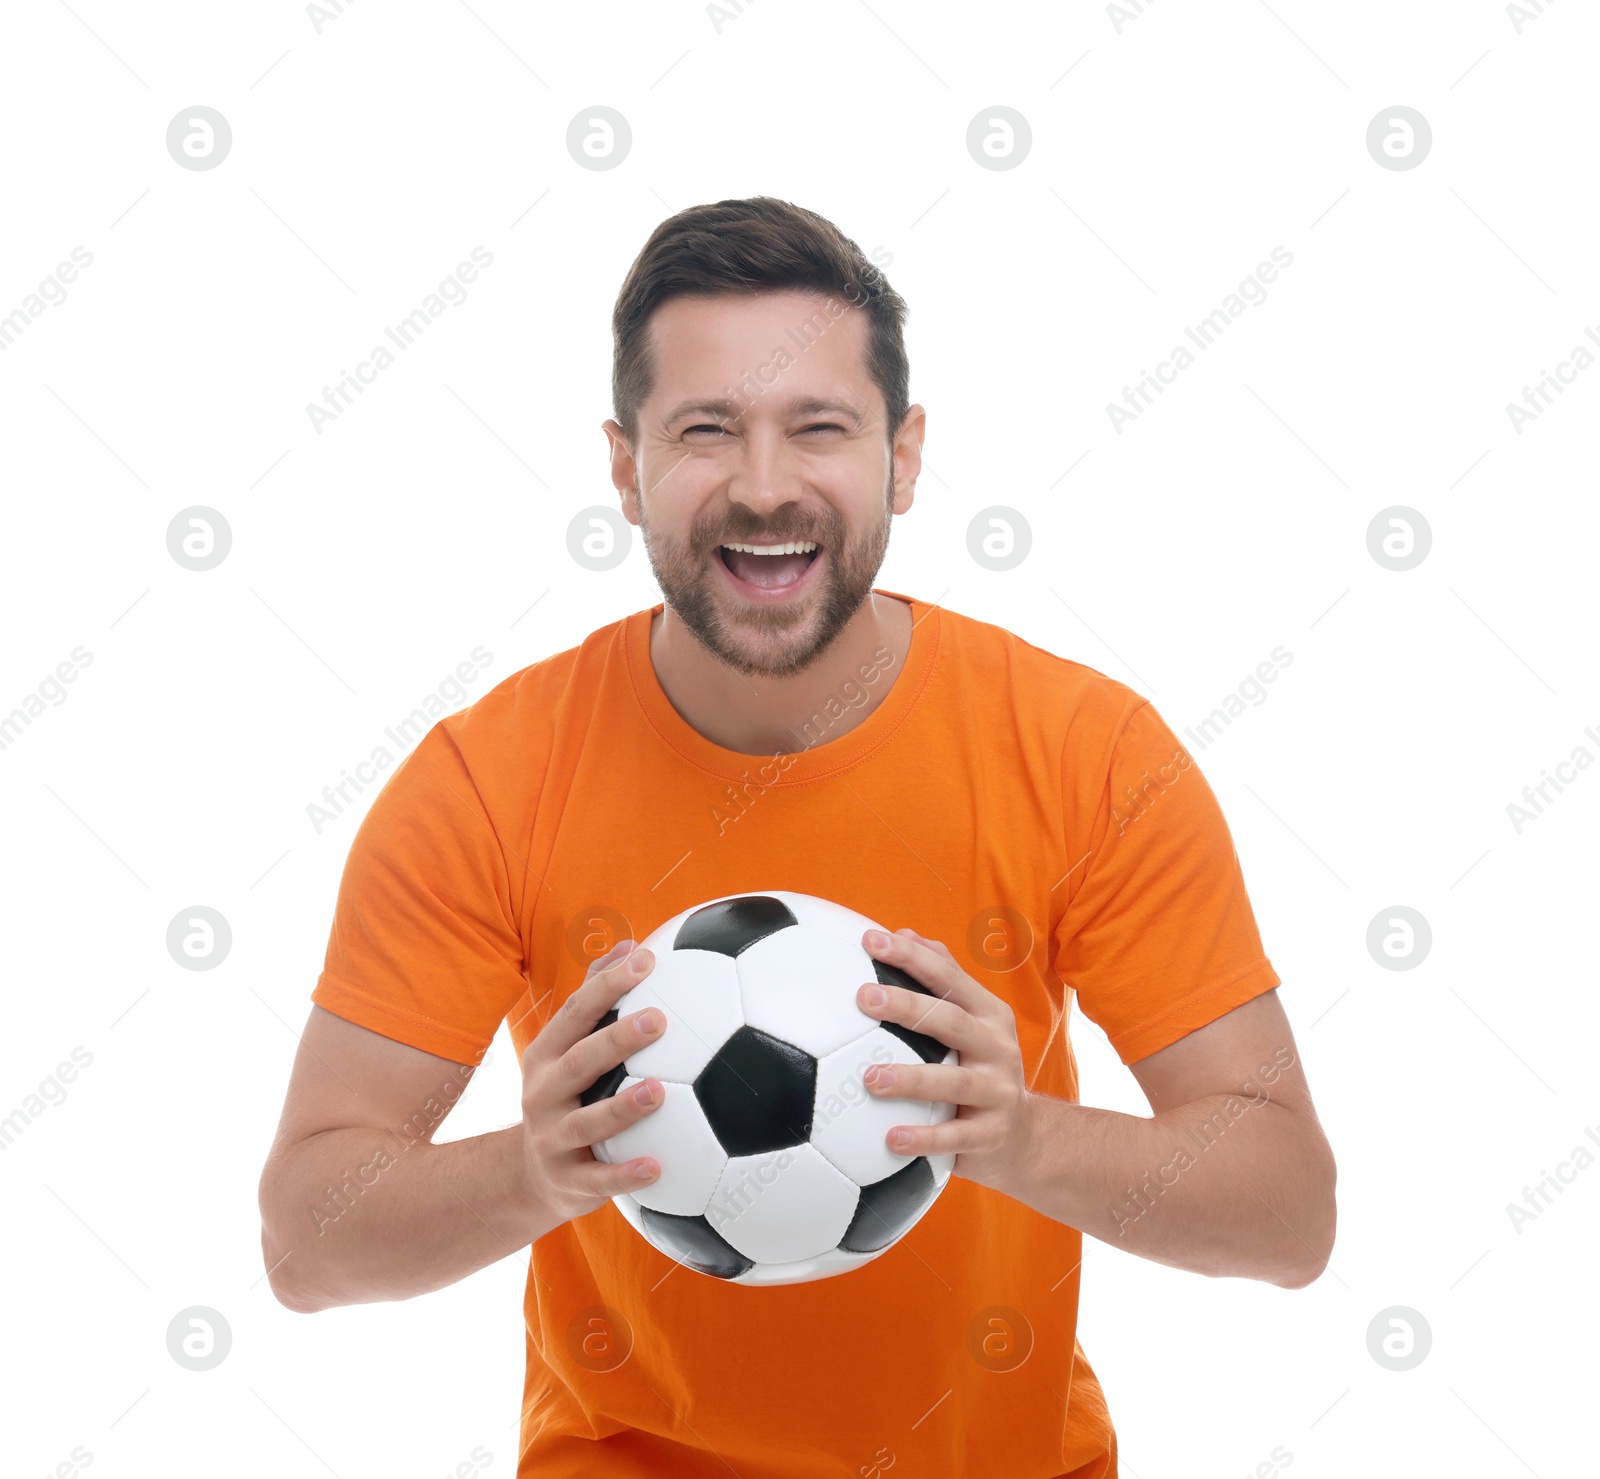 Photo of Emotional sports fan with ball celebrating on white background